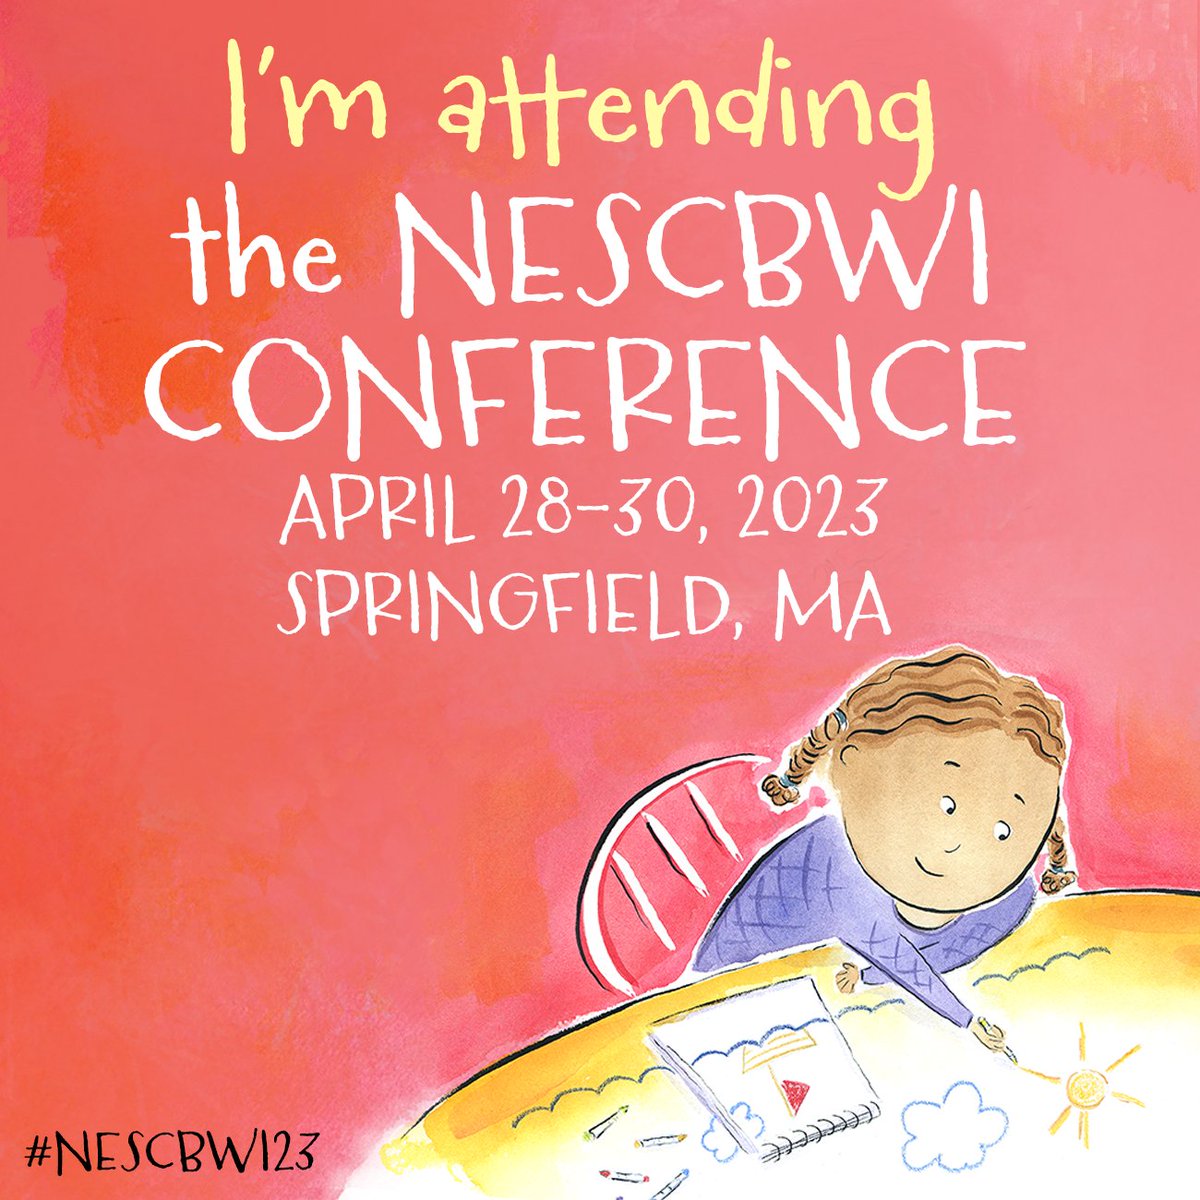 Feeling those pre-conference jitters but so excited to learn from the best!! Thank you again @nescbwi for the scholarship ♥️ #NESCBWI23 #kidlit #writingcommunity